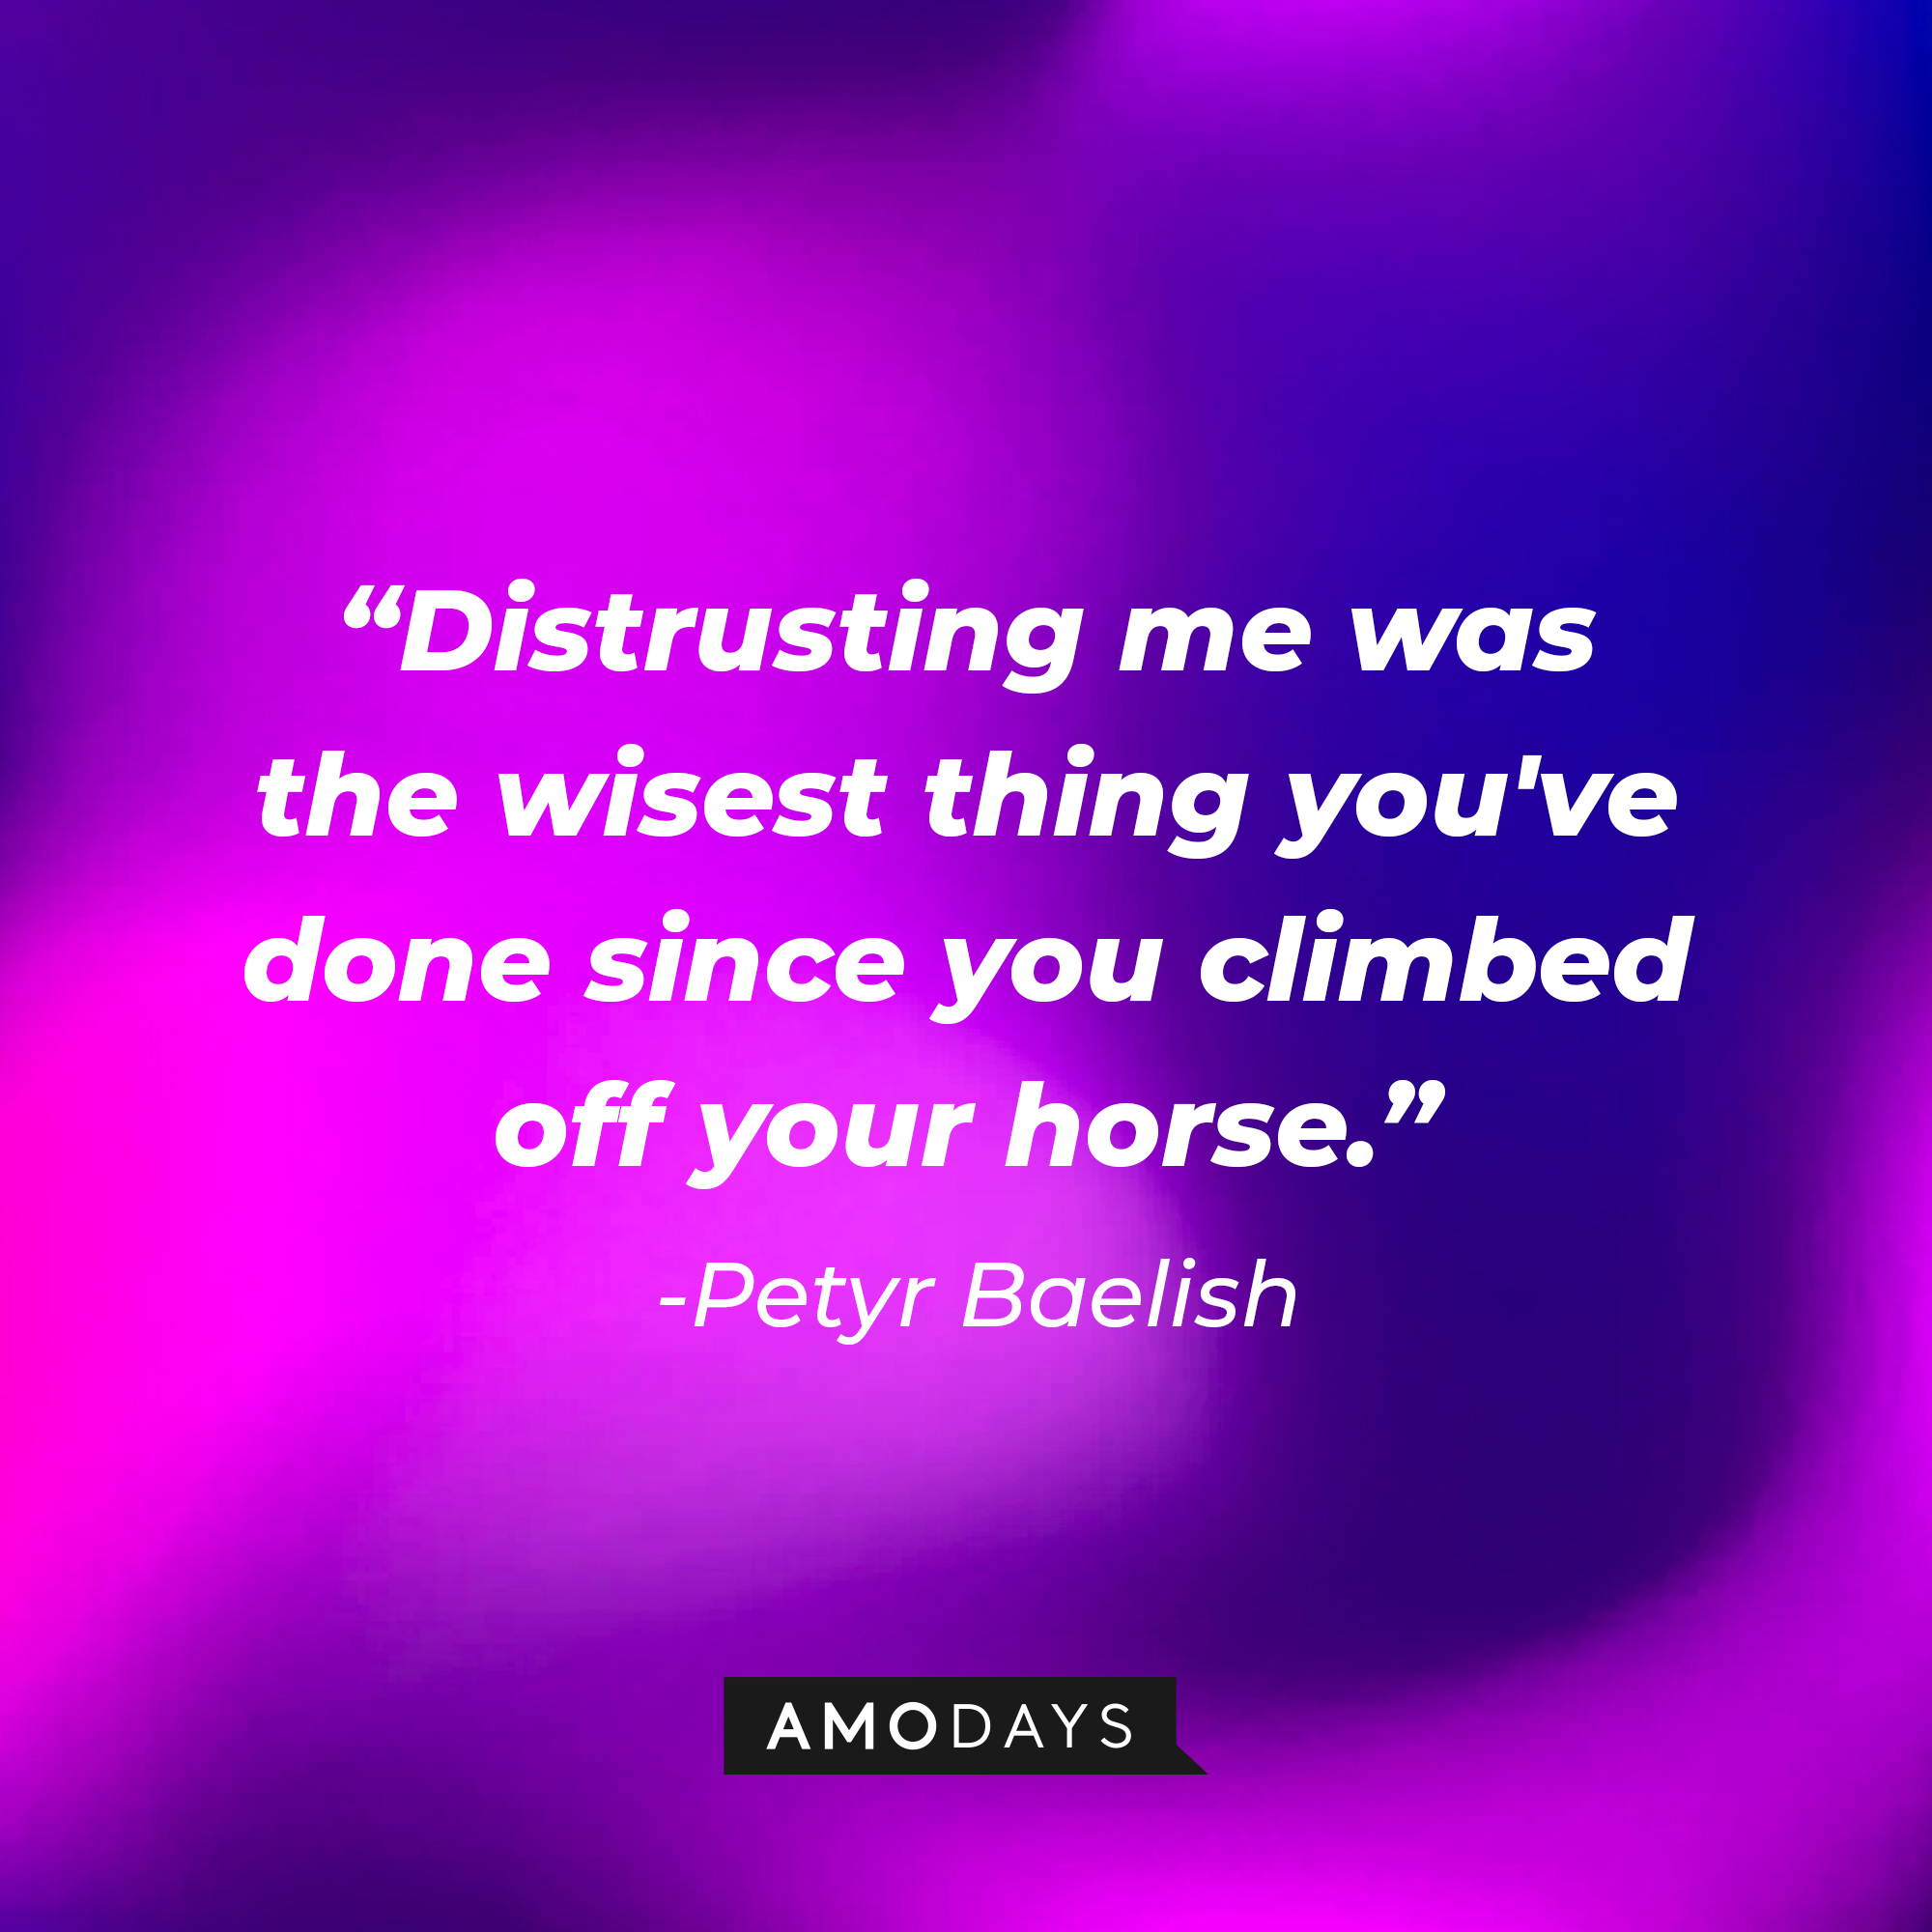 Petyr Baelish’s quote: “Distrusting me was the wisest thing you've done since you climbed off your horse.”  | Source: AmoDays